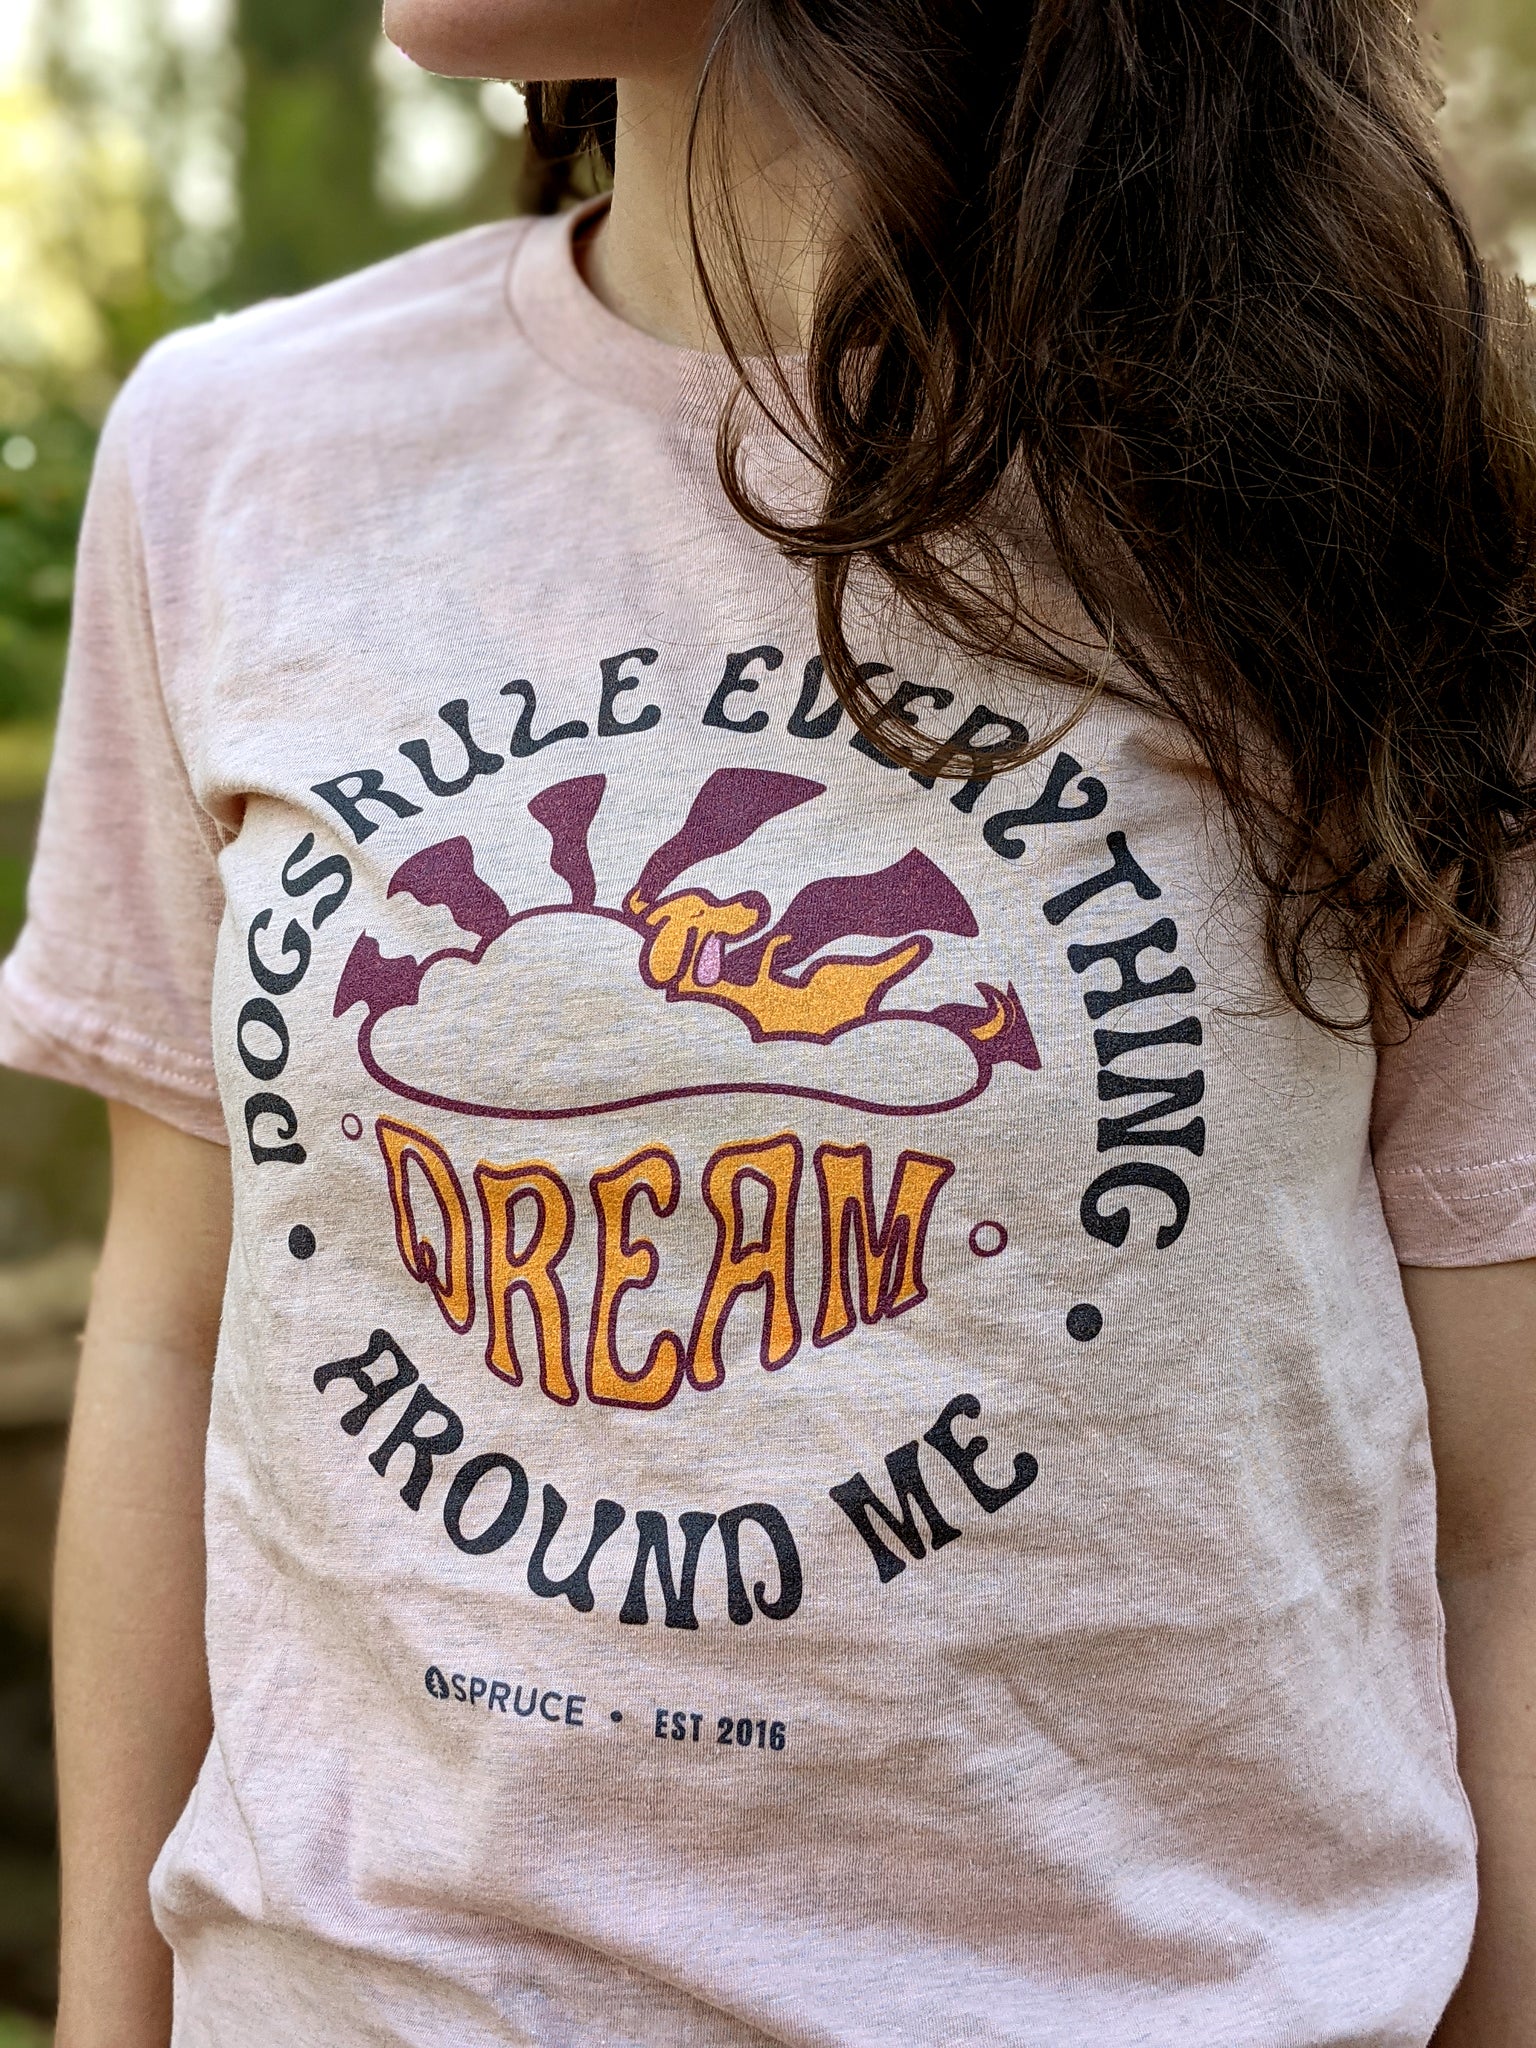 Woman wearing dog 'DREAM' t-shirt with her dog 